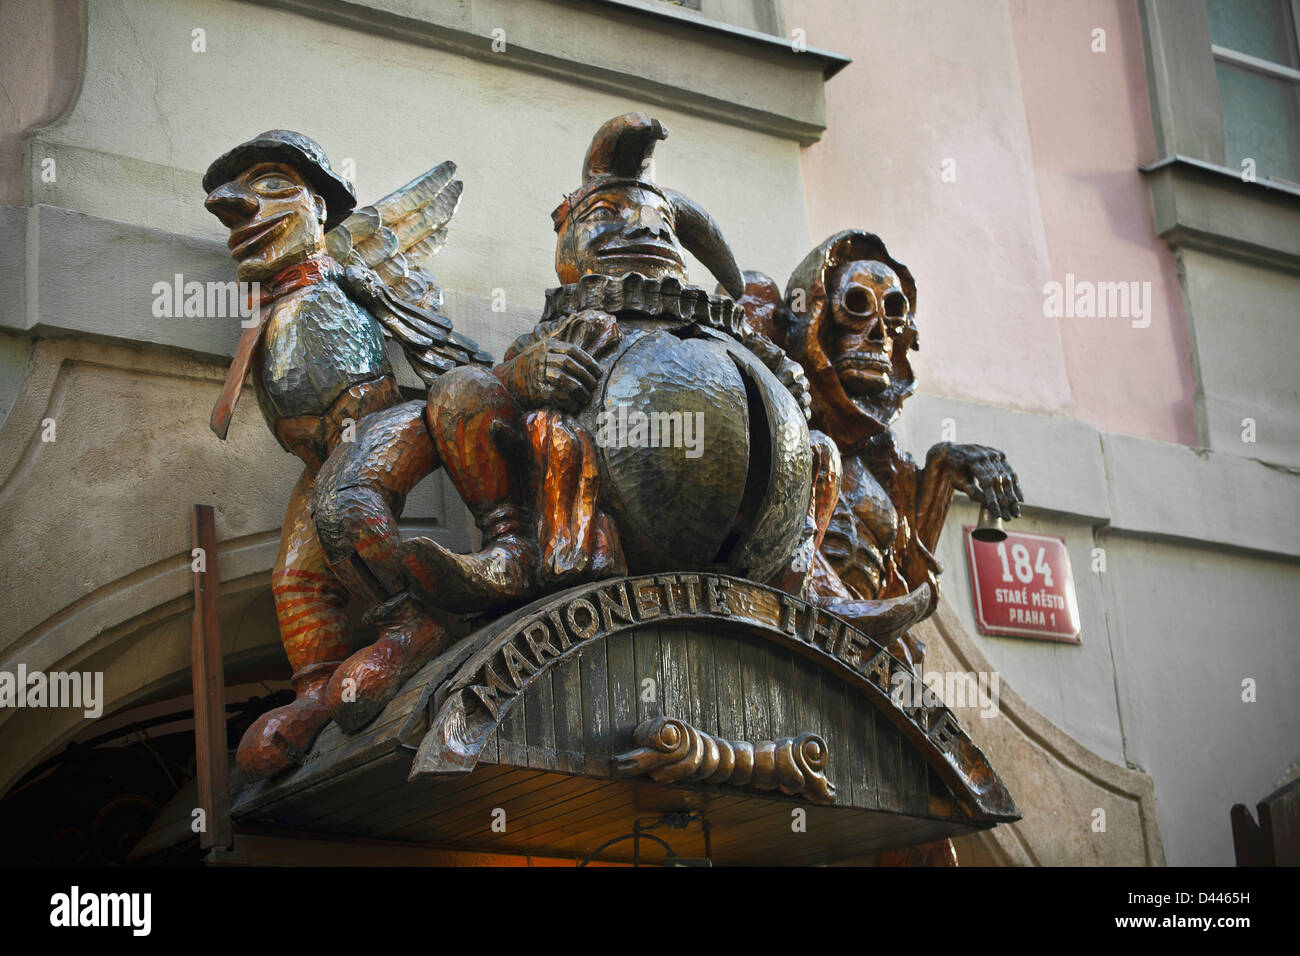 Wooden carvings above entrance to Marionette Theatre, Prague Stock Photo